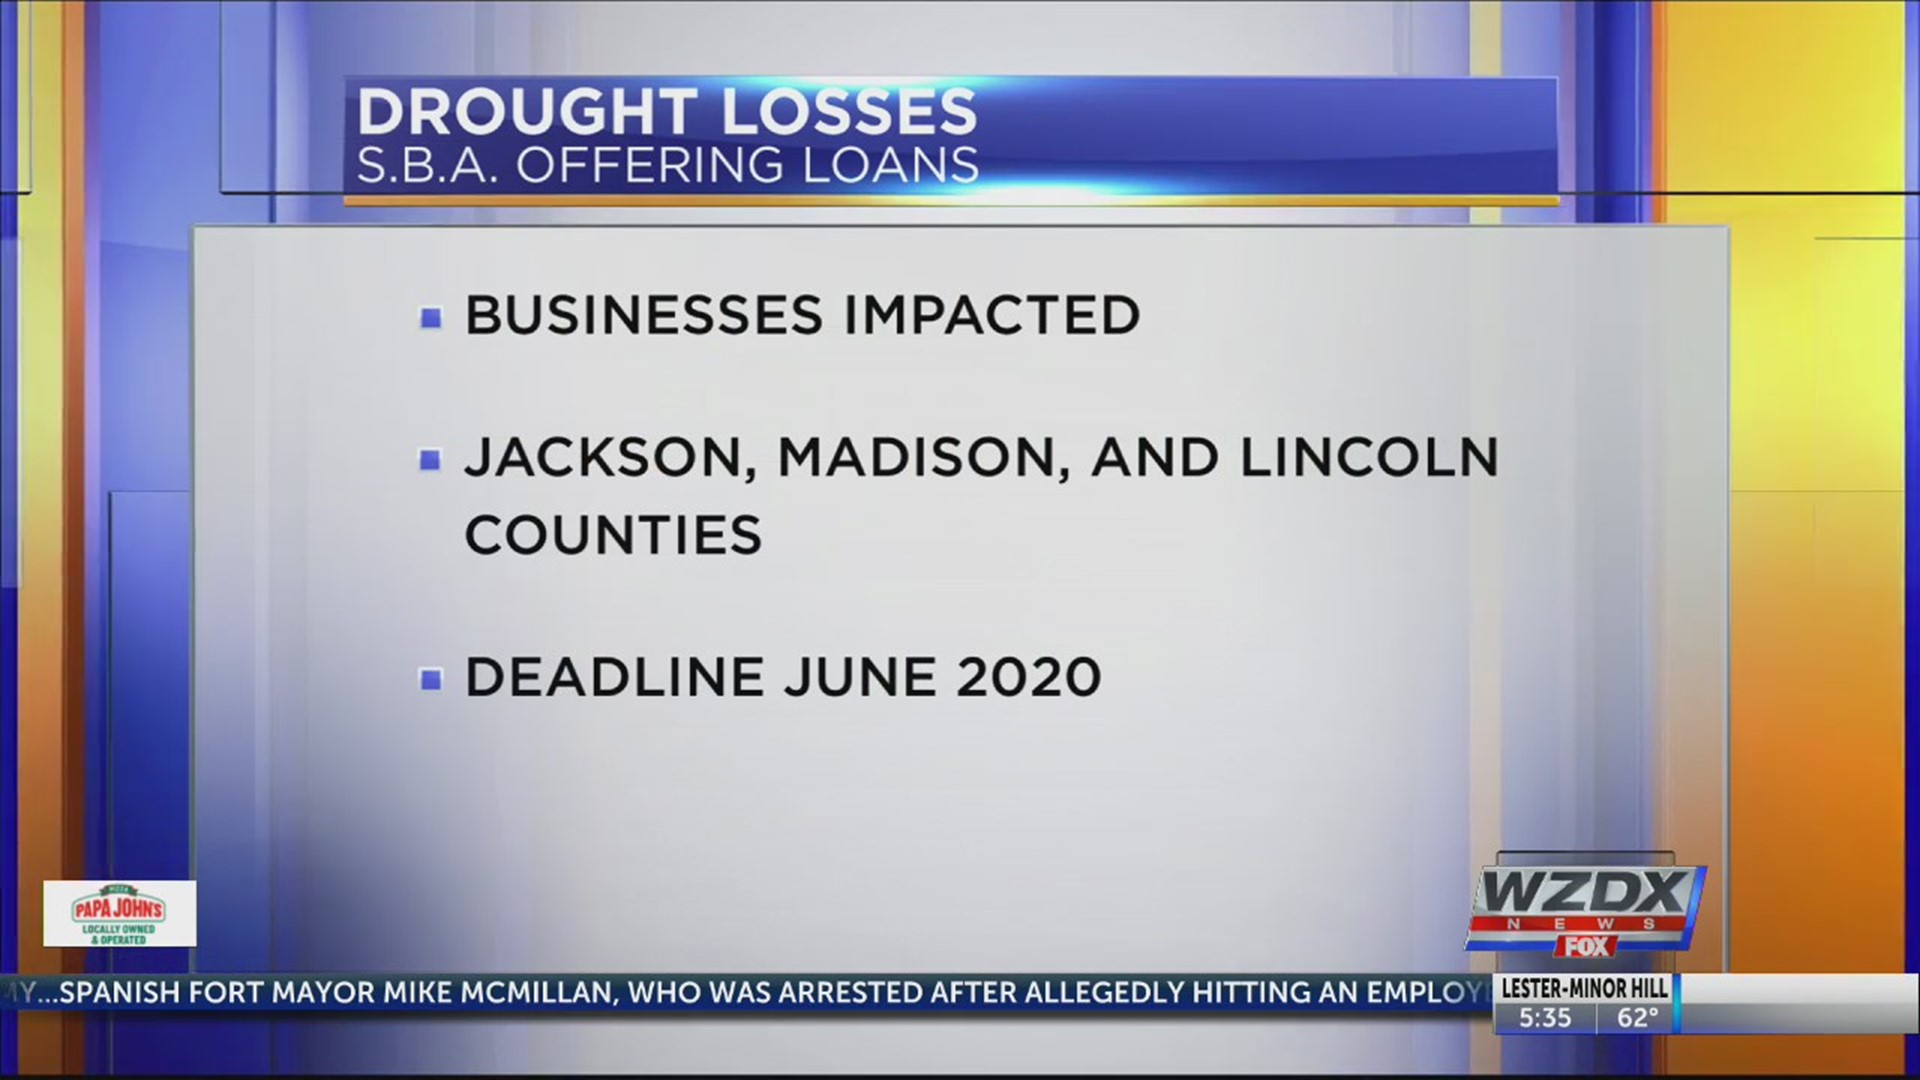 Farmers can now submit drought loans in Jackson and Madison counties in Alabama, and Lincoln County in Tennessee.